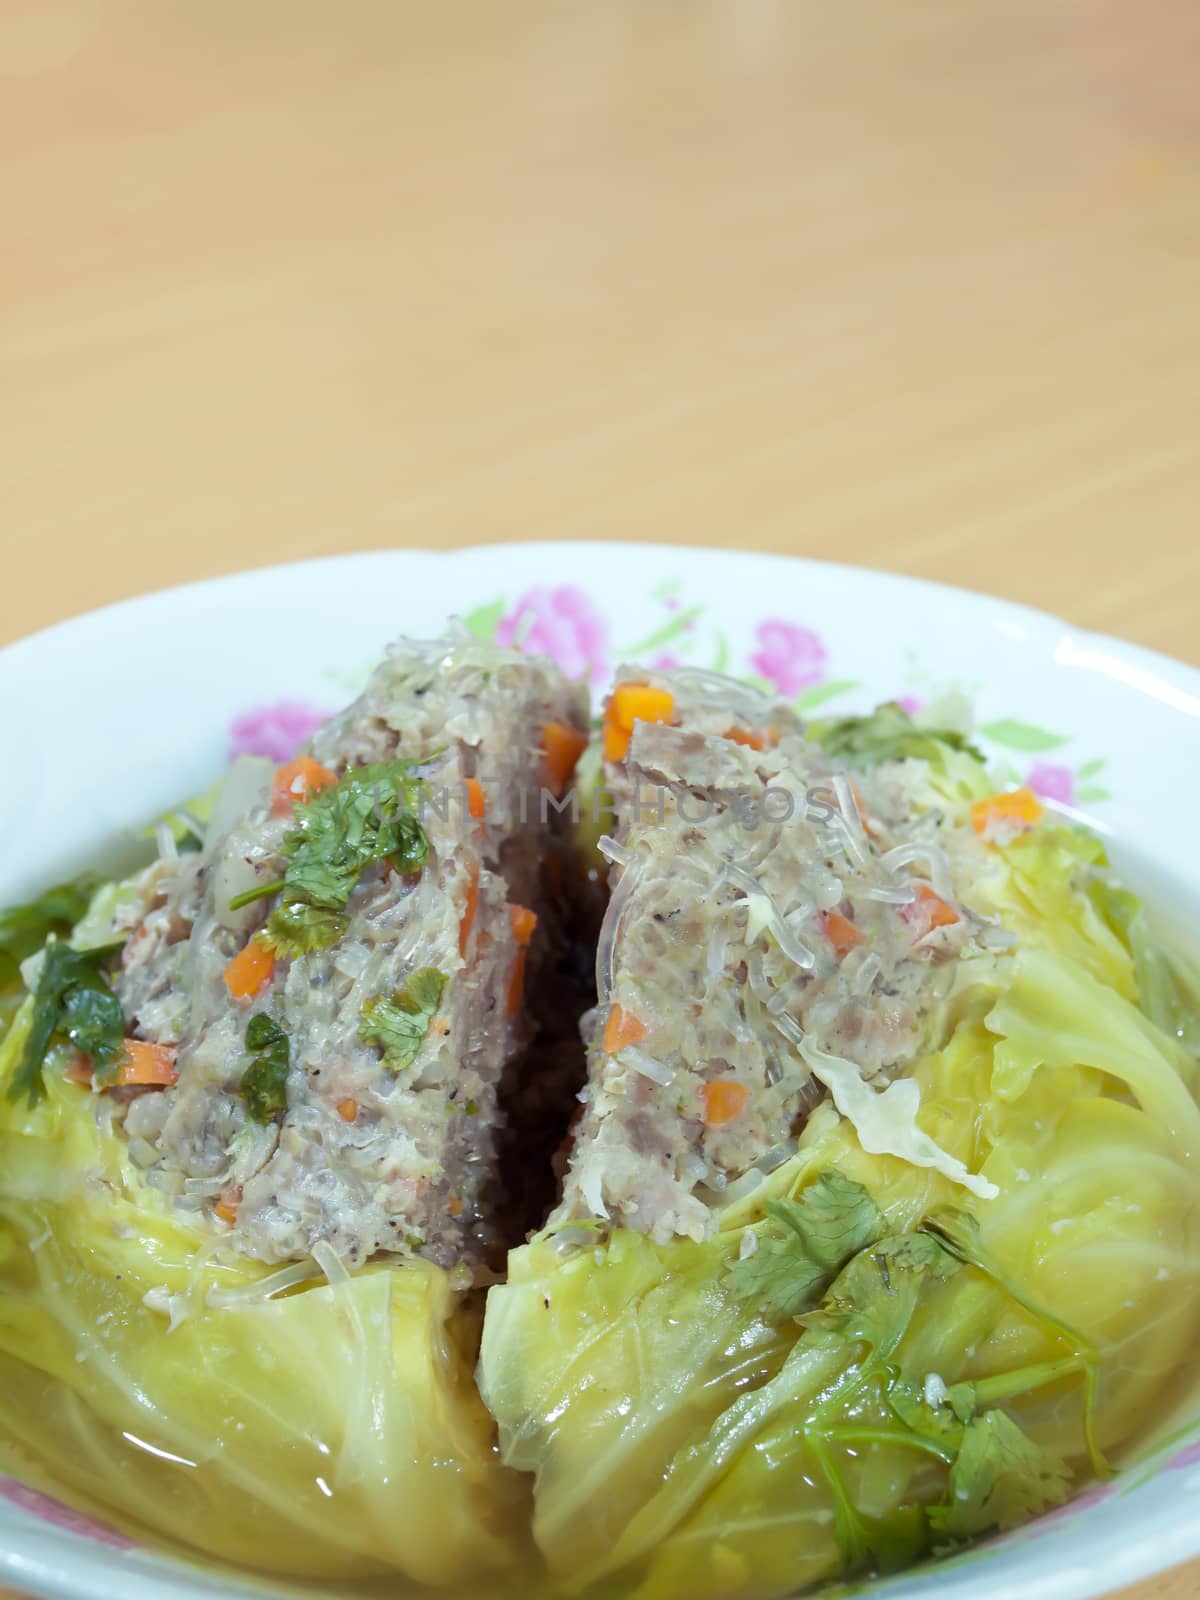 Minced pork mixed with flavouring stuffed in cabbage in soup in bowl, traditional Thai style food.